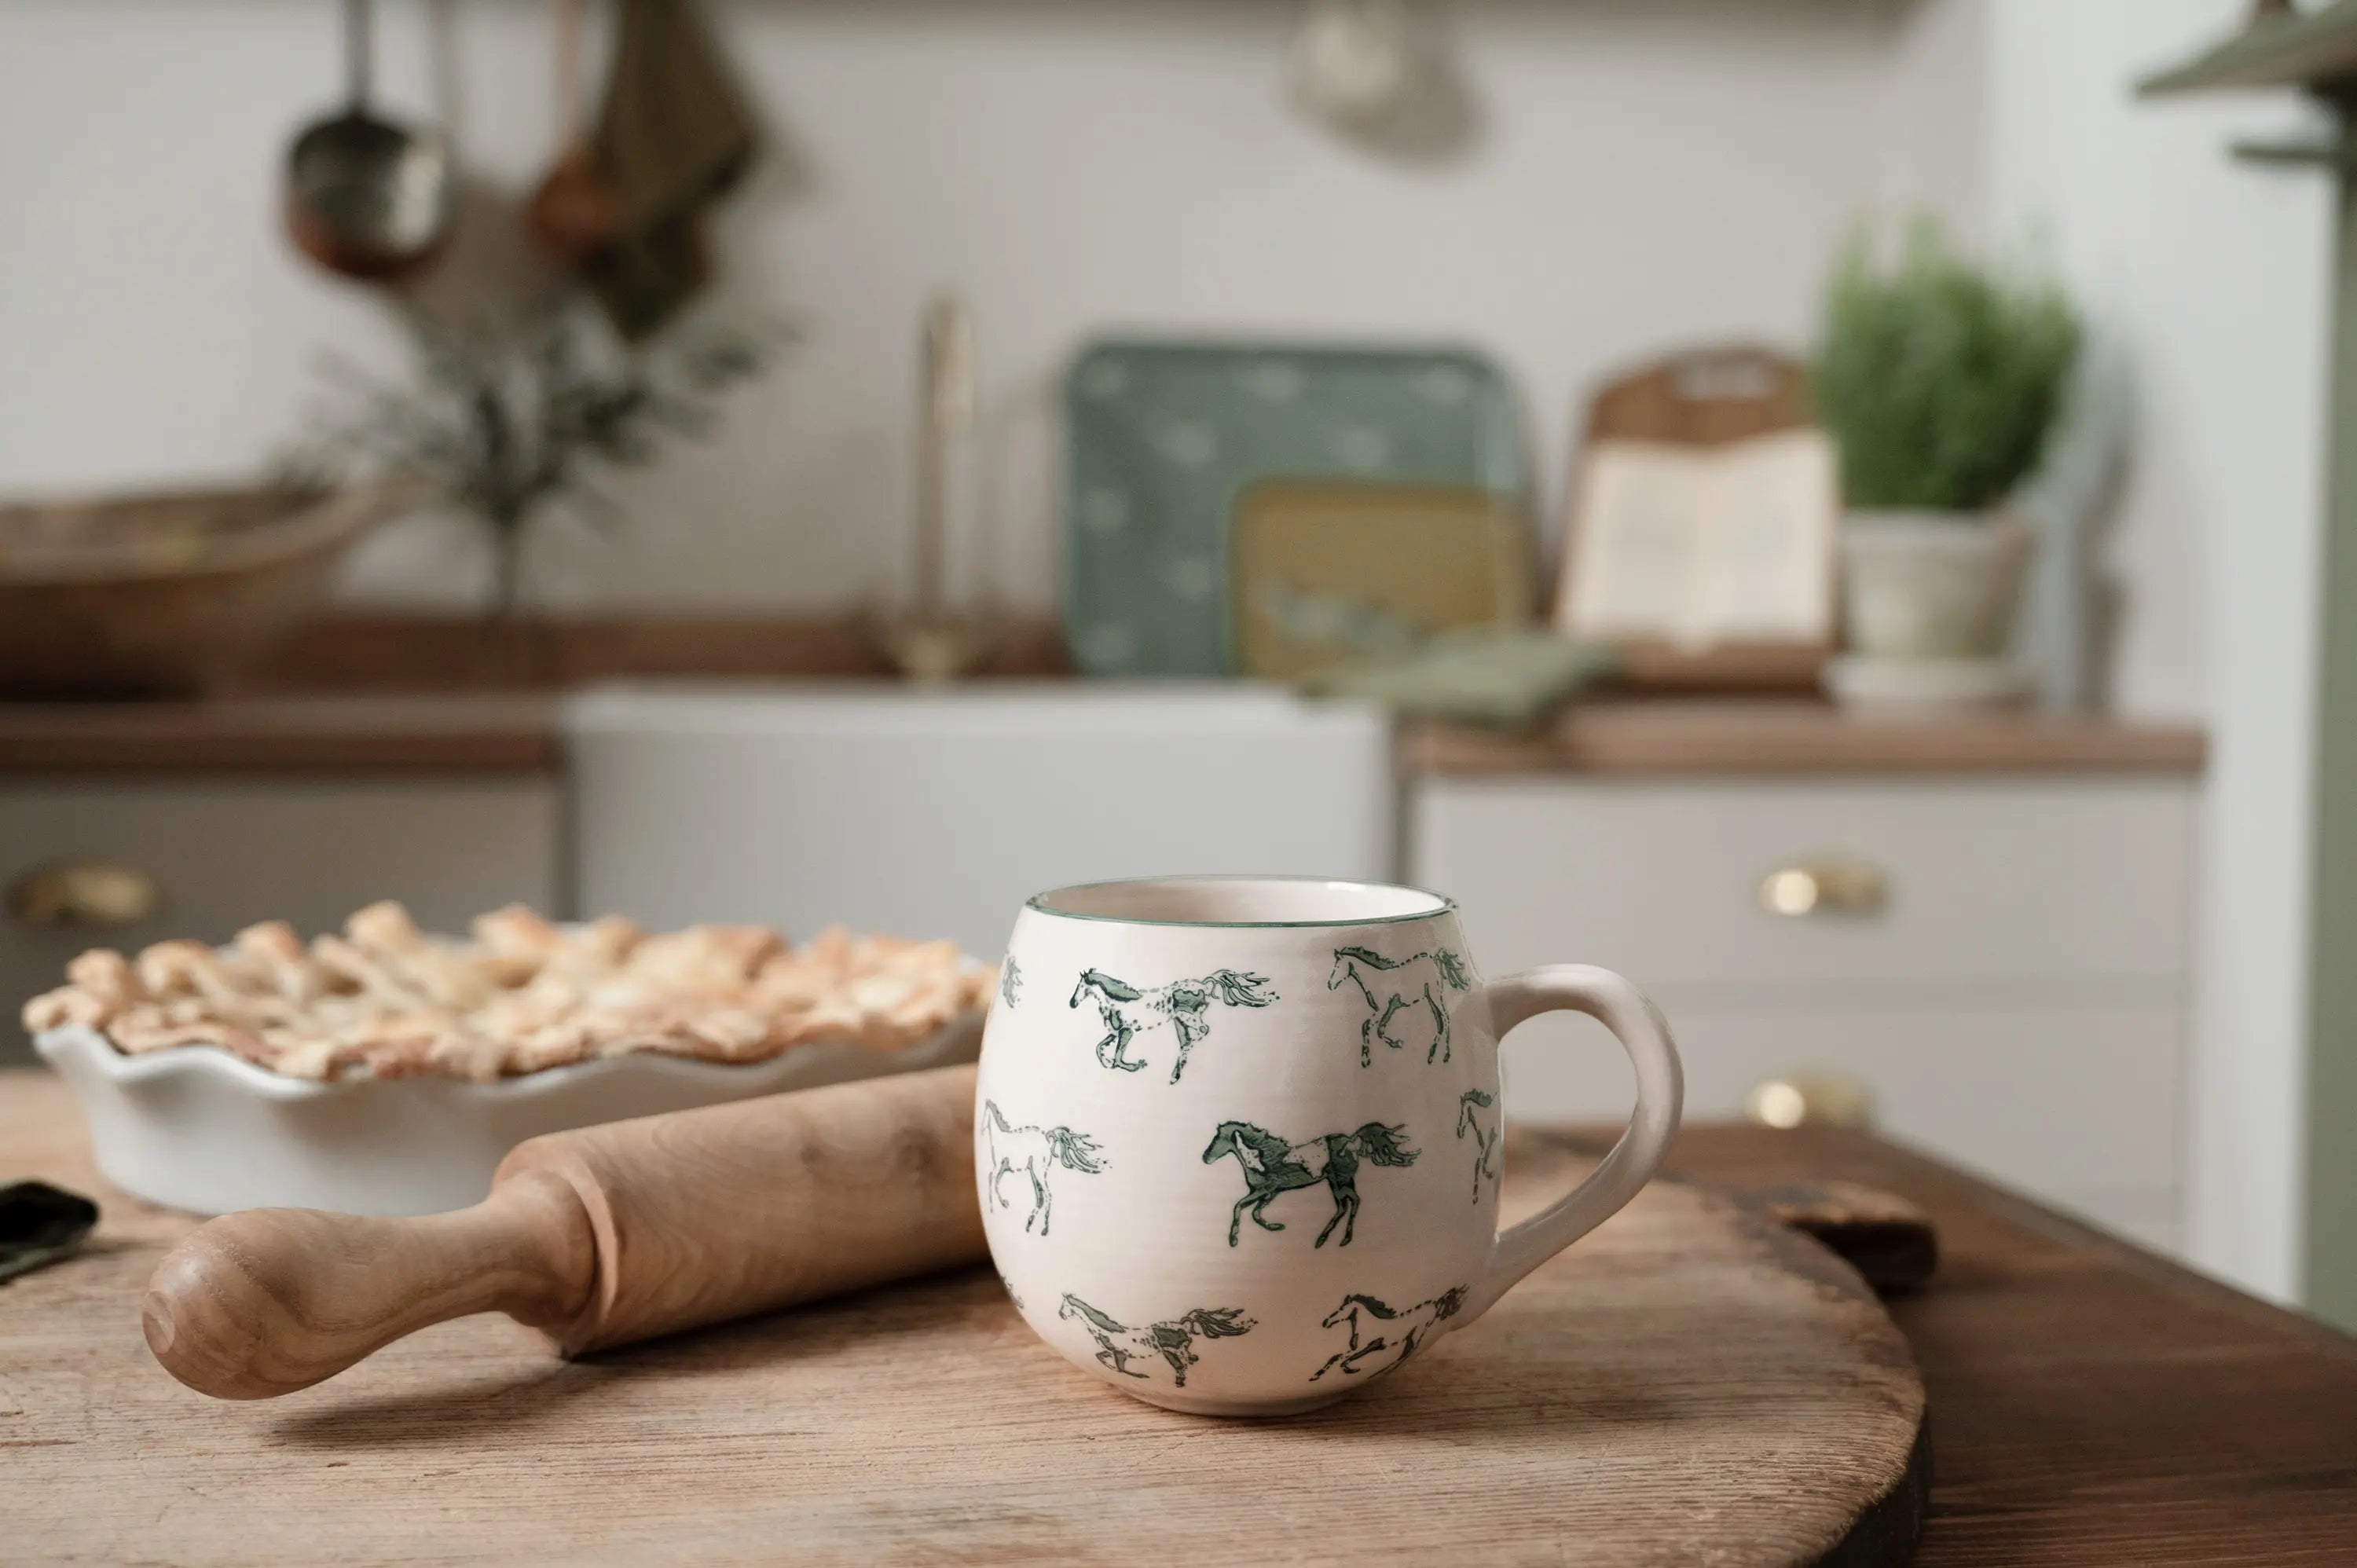 horse illustrations on a stoneware mug in a rustic country kitchen